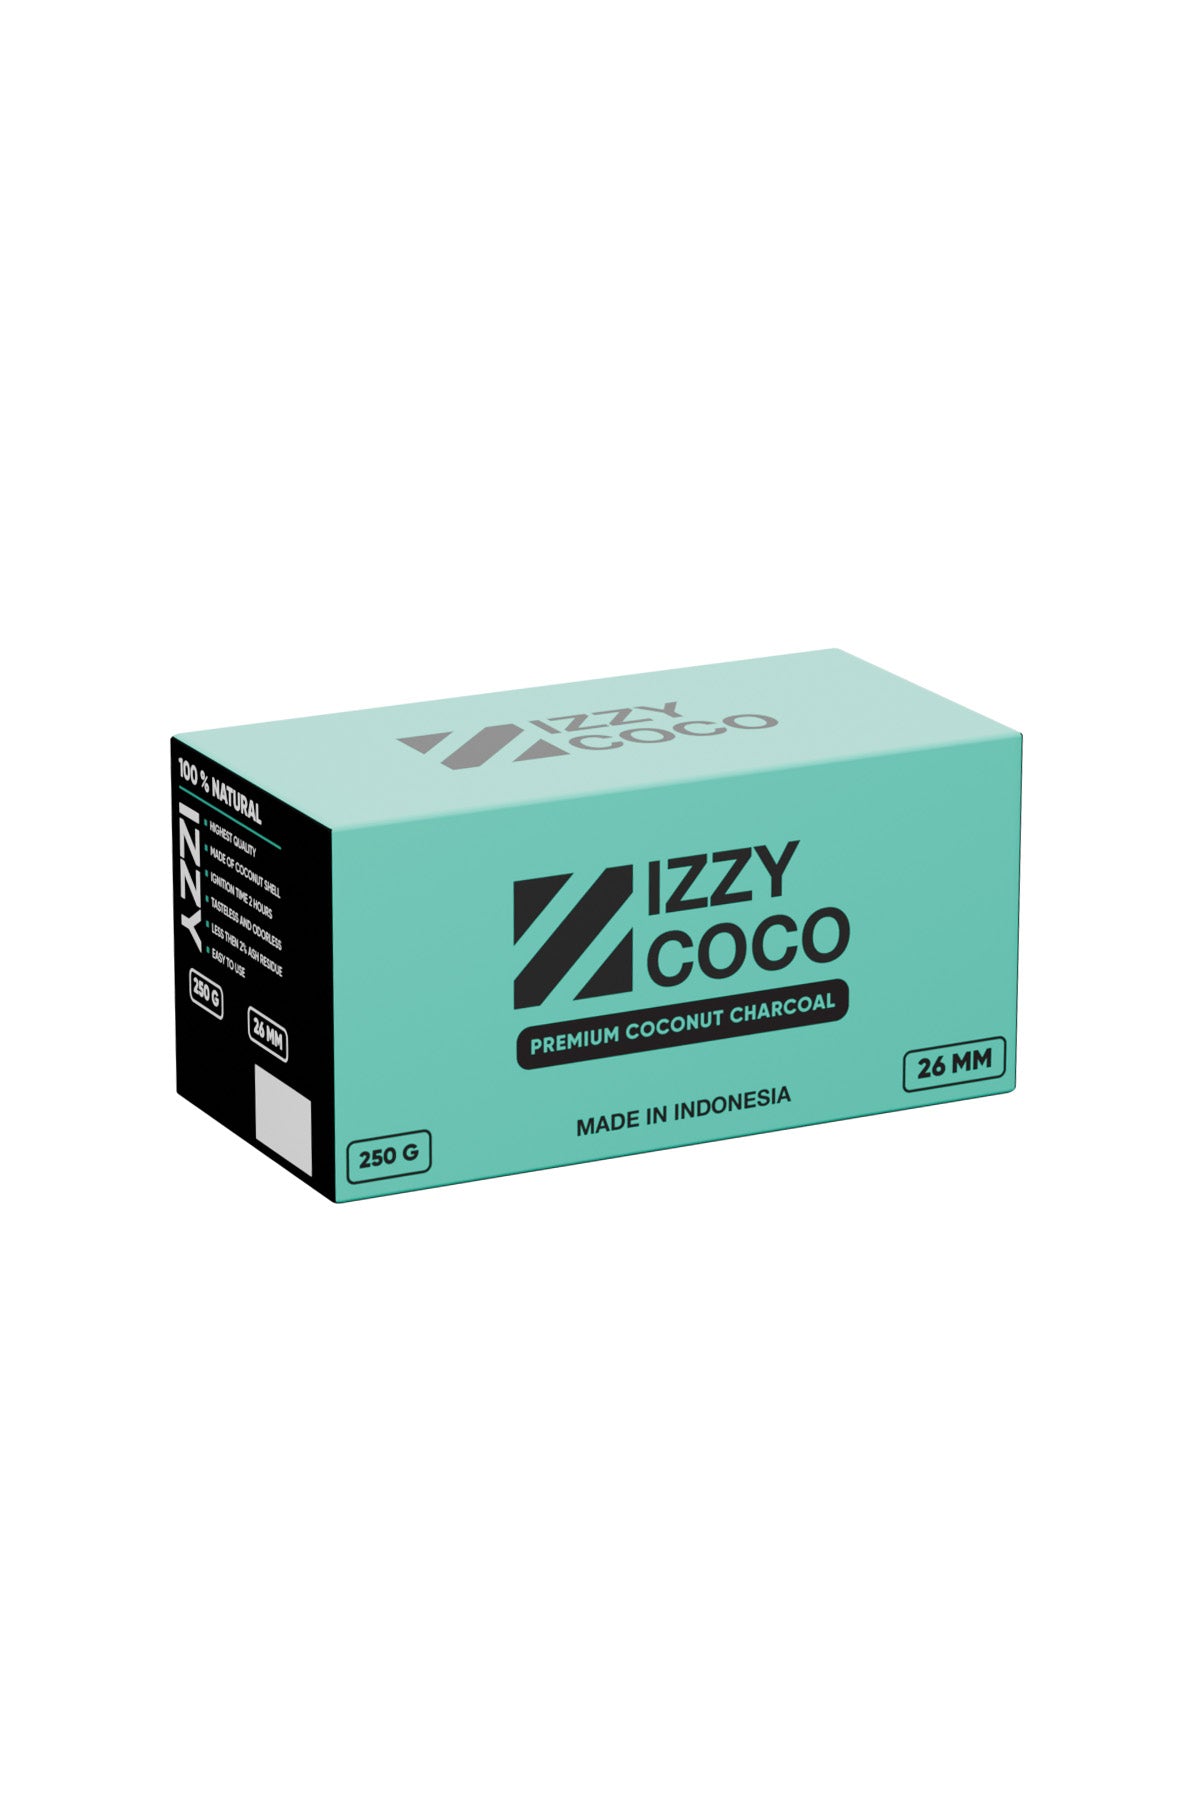 Charcoal - Izzy Coco 26mm 250gr